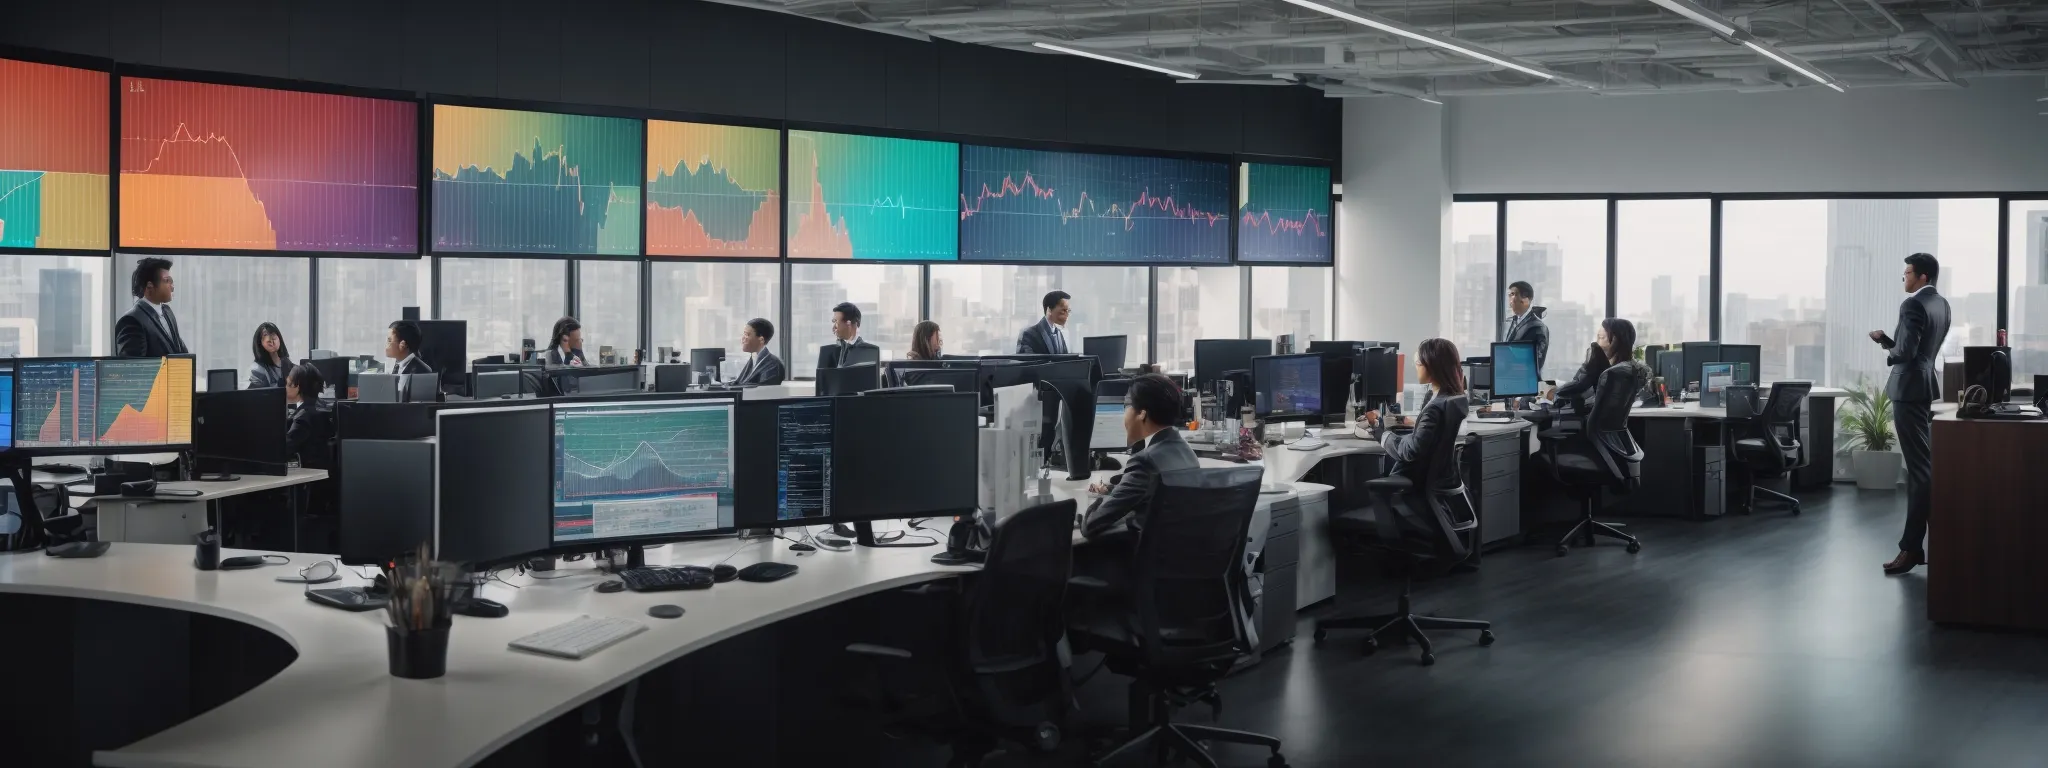 a panoramic view of a modern office with a central large monitor displaying colorful graphs and analytics, surrounded by employees engaged in strategic discussions.